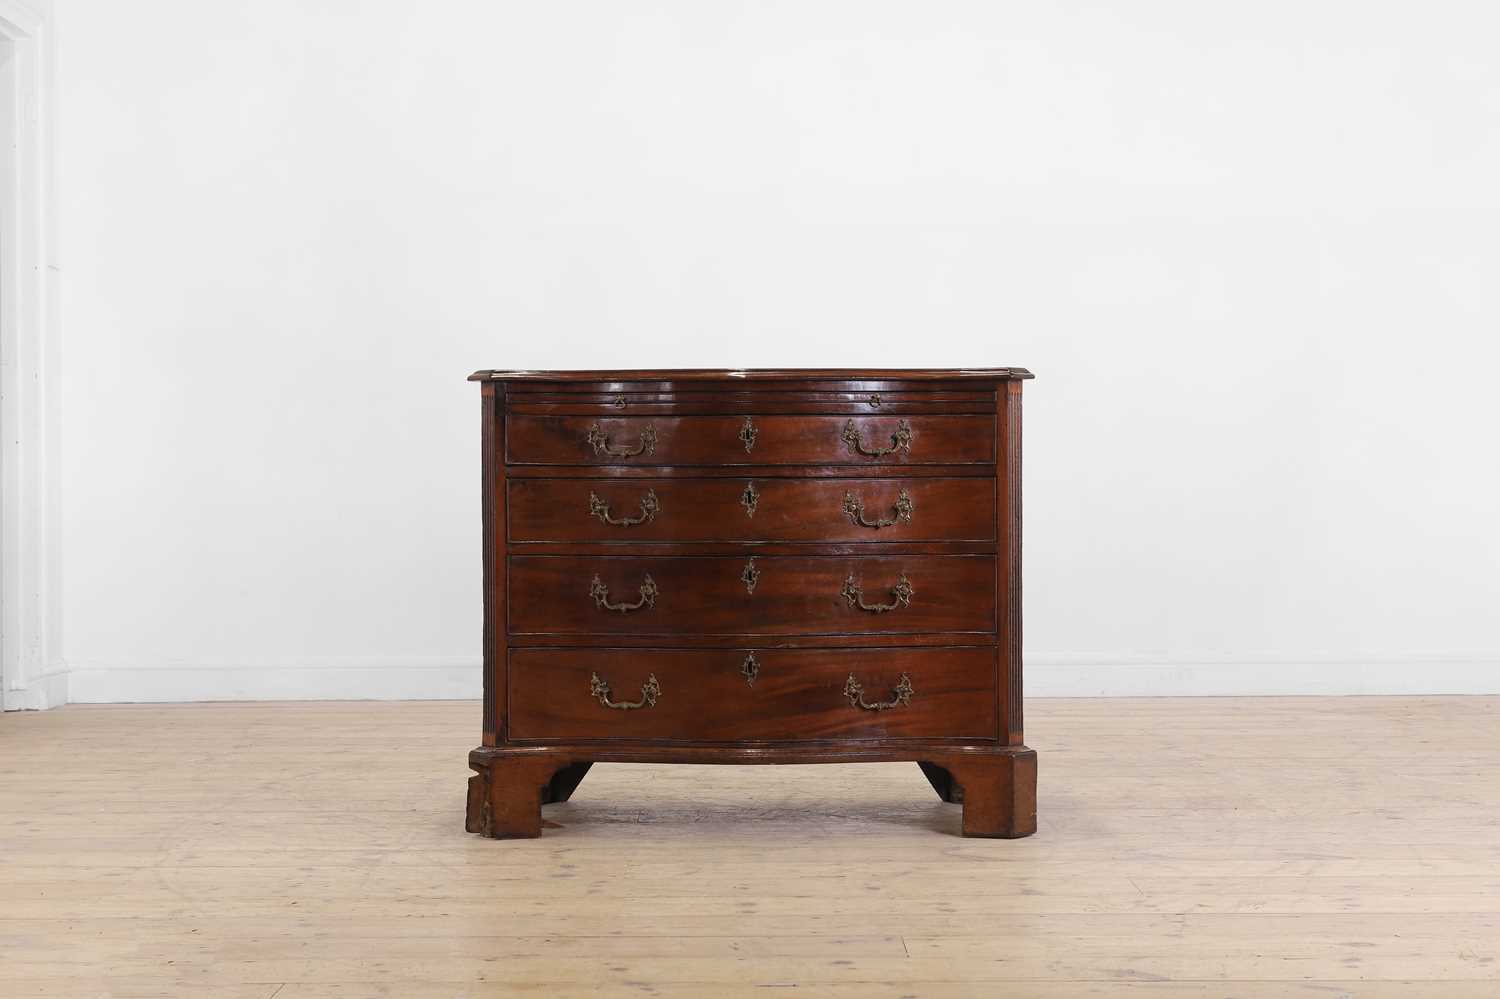 Lot 436 - A George III mahogany serpentine chest of drawers